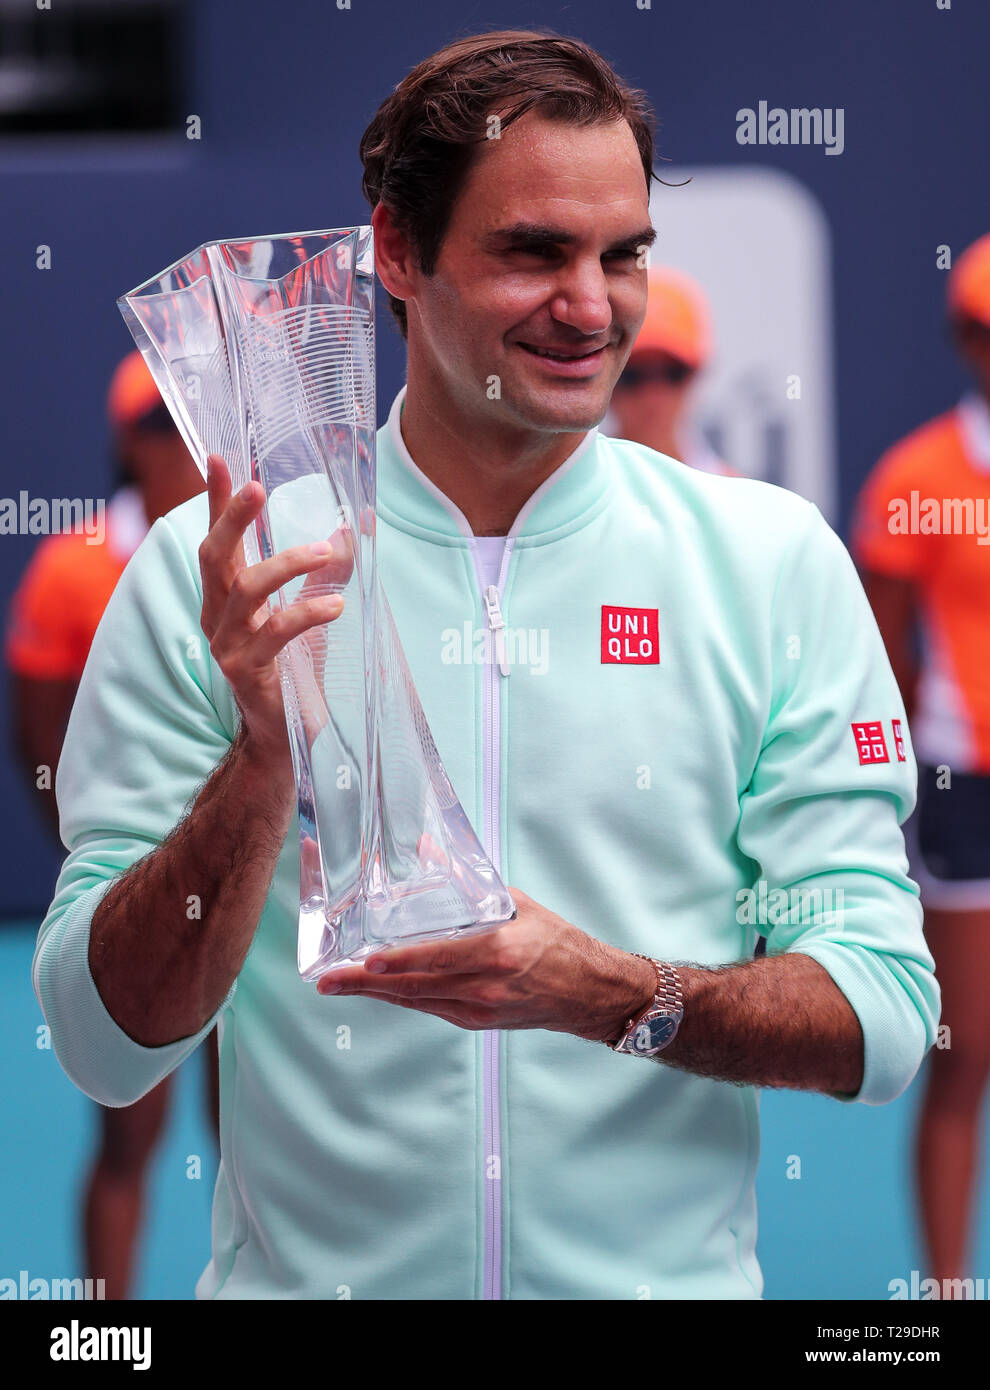 Miami Gardens, Florida, USA. 31st Mar, 2019. Roger Federer, of Switzerland,  poses with the winners trophy during the awards ceremony, after defeating  John Isner, of the United States, in the Men's Final